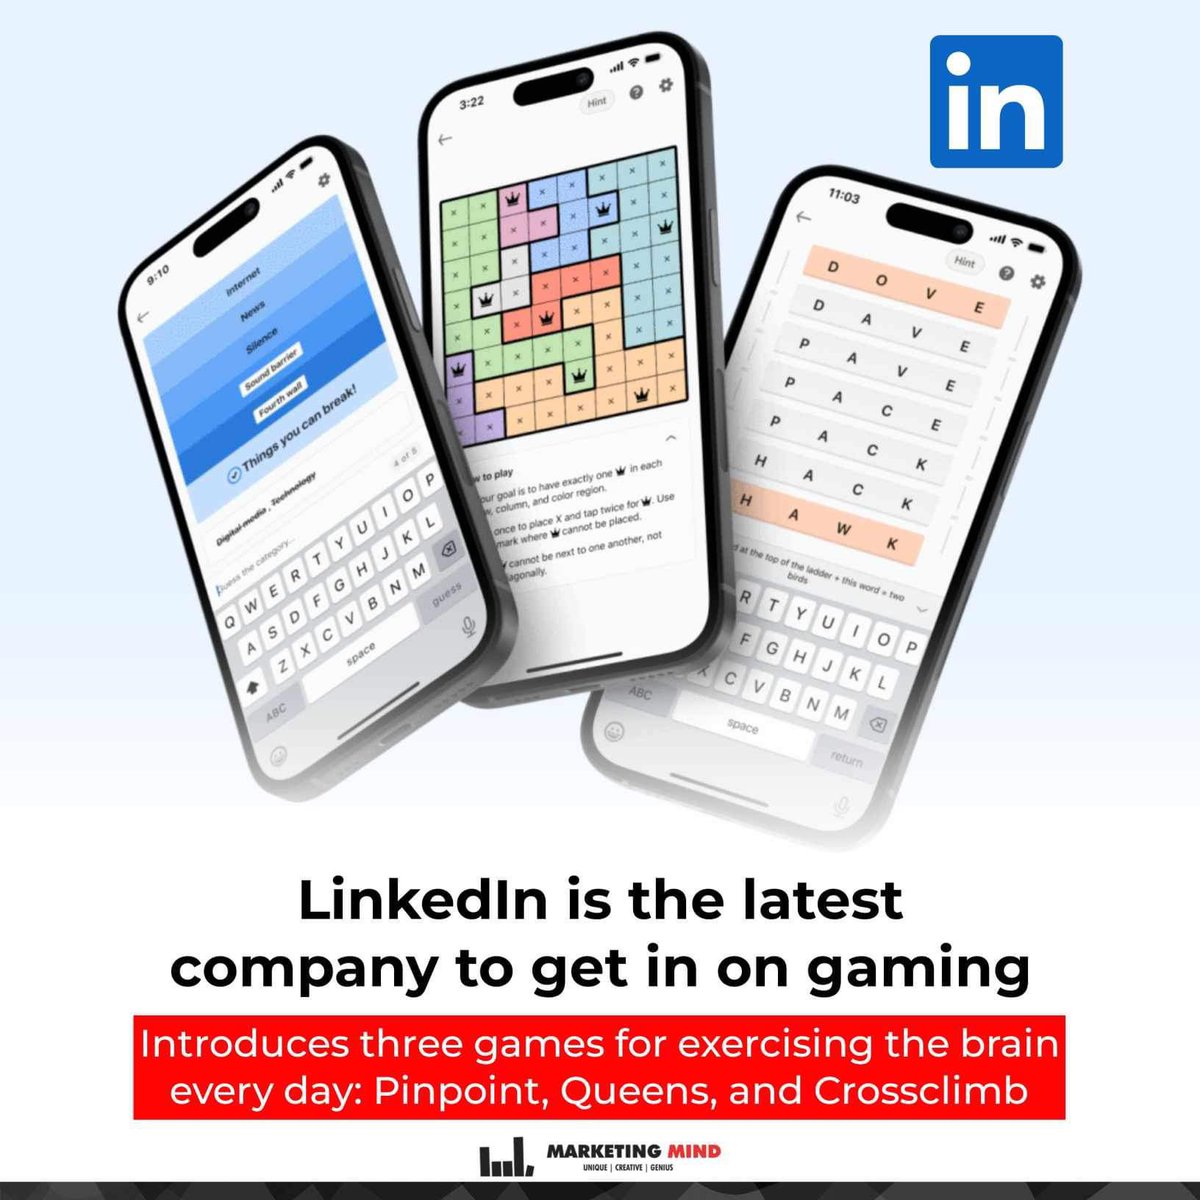 LinkedIn is now in the gaming business. Starting today, users on the LinkedIn mobile app or on desktop can play one of three different games — Pinpoint, Queens, and Crossclimb. #MarketingMind #LinkedIn #WhatsBuzzing